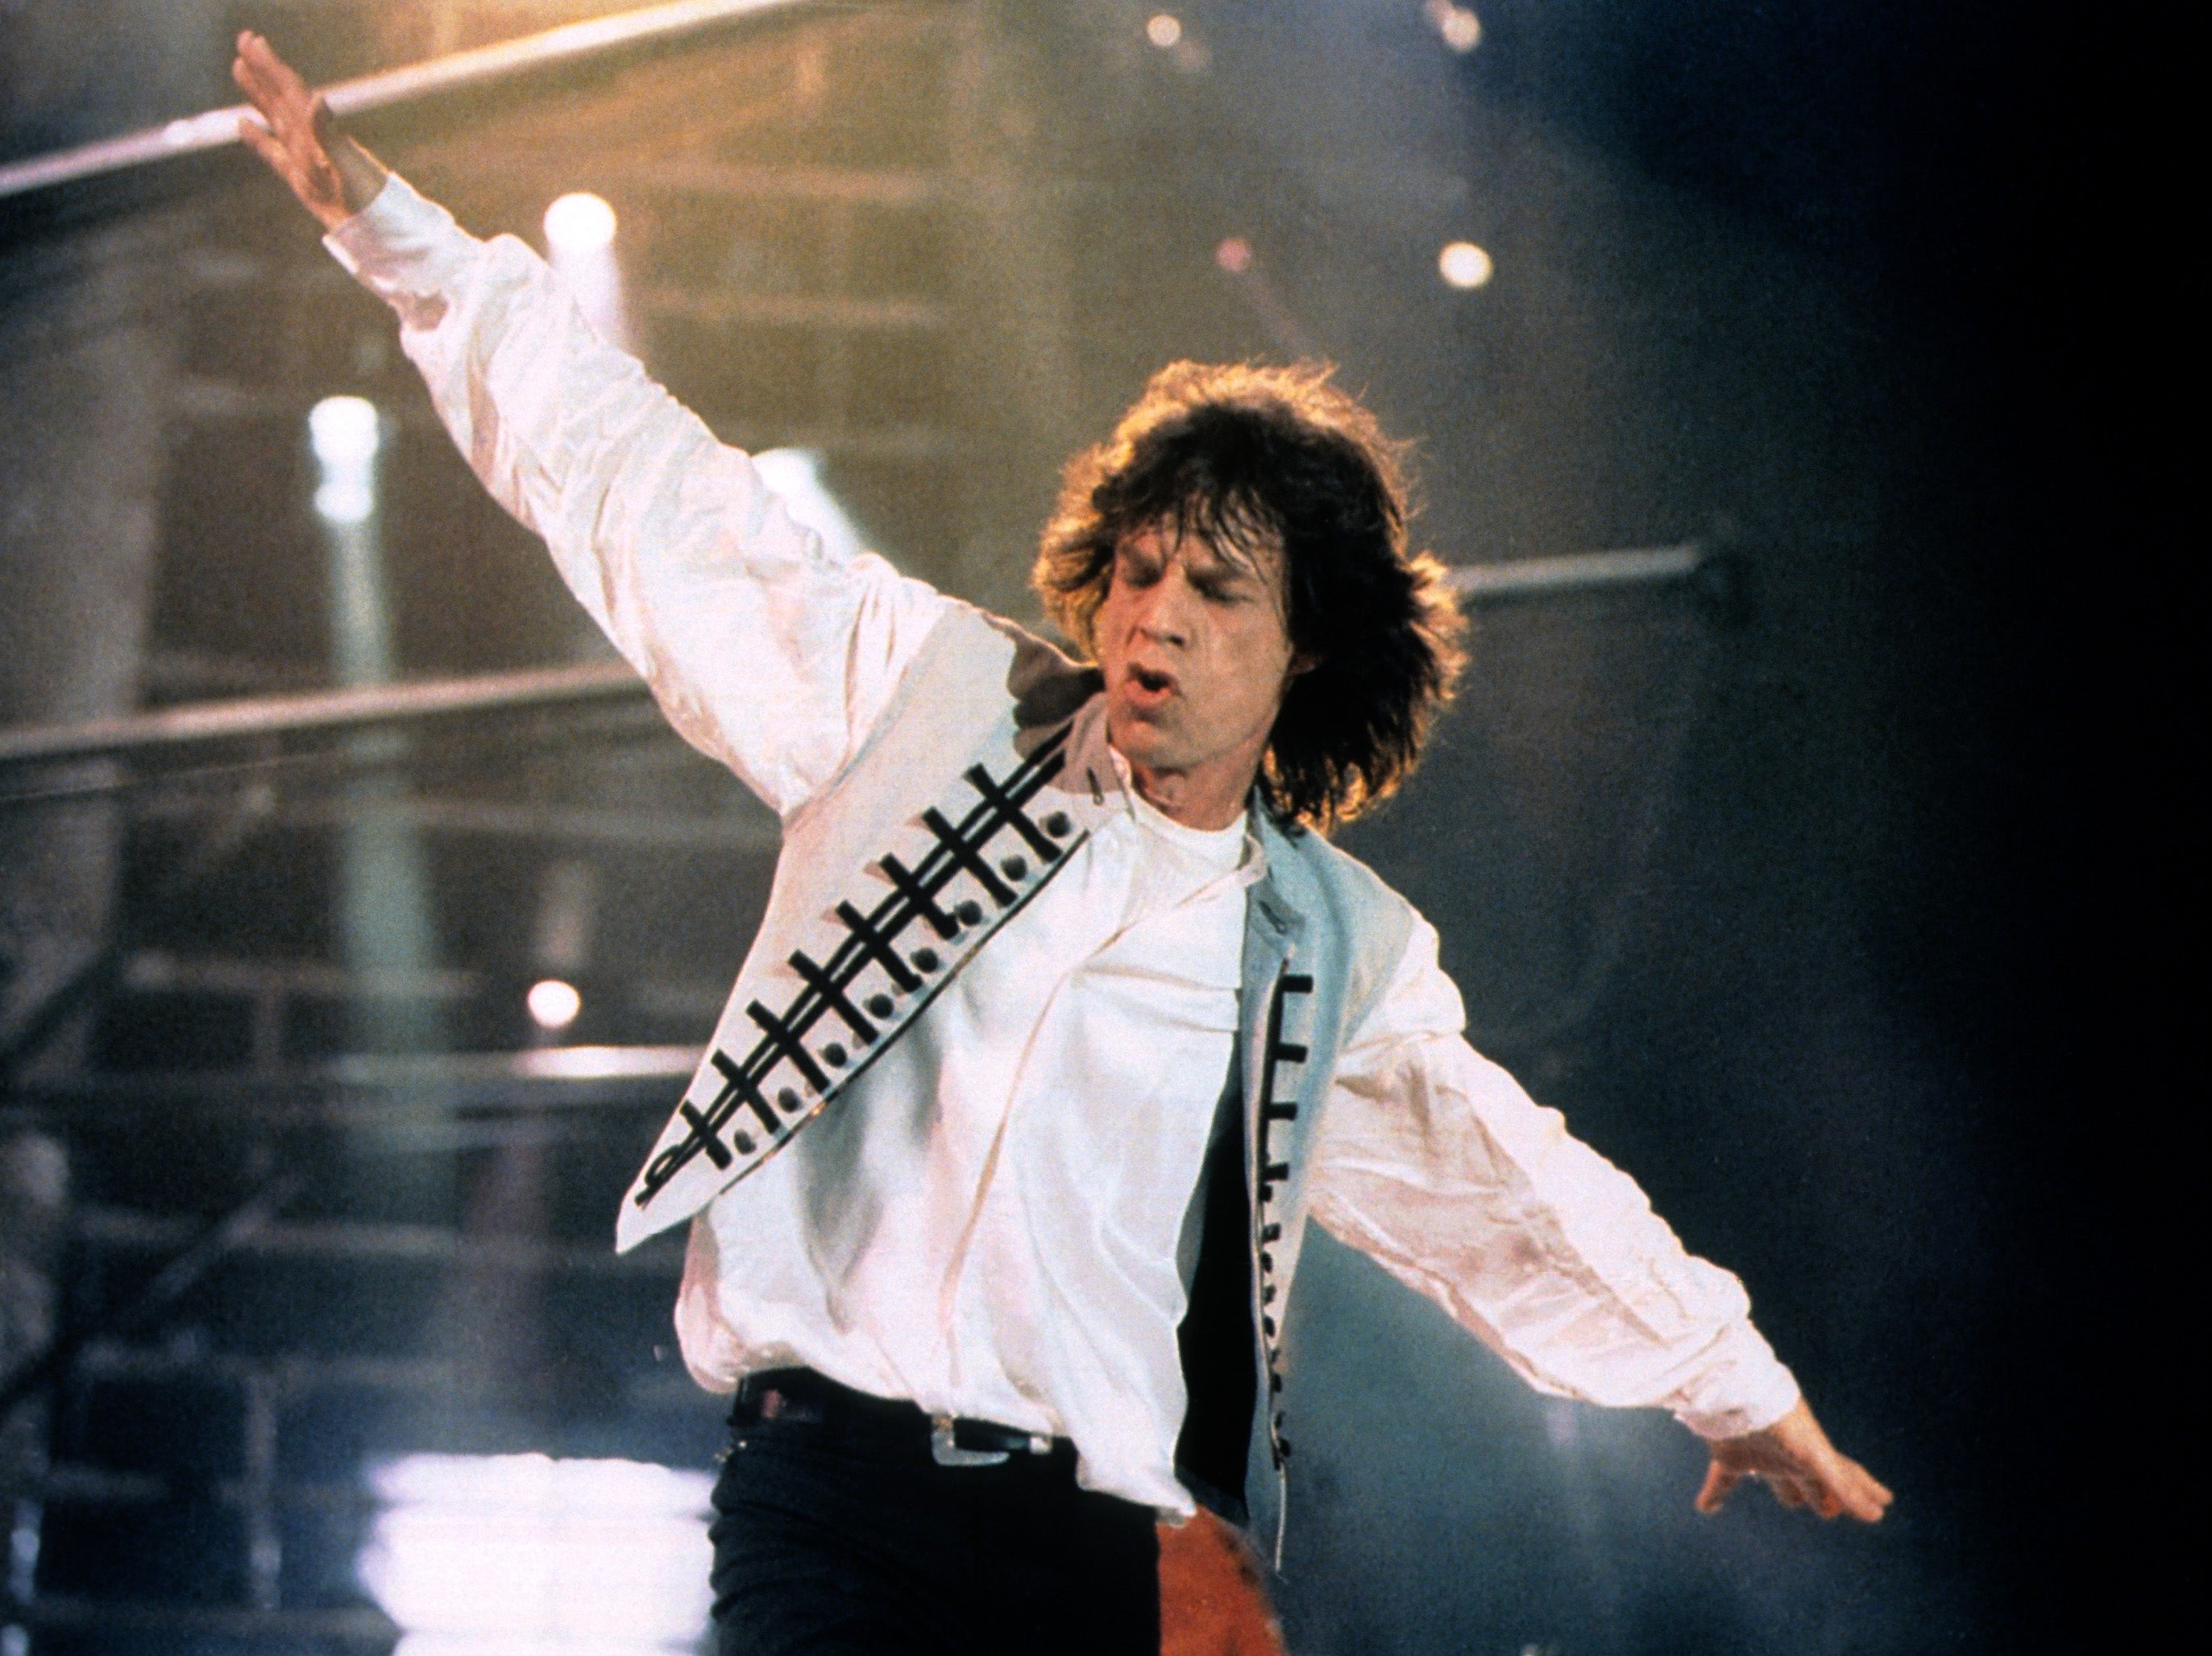 Jagger performing on stage as part of a 1995 Rolling Stones tour